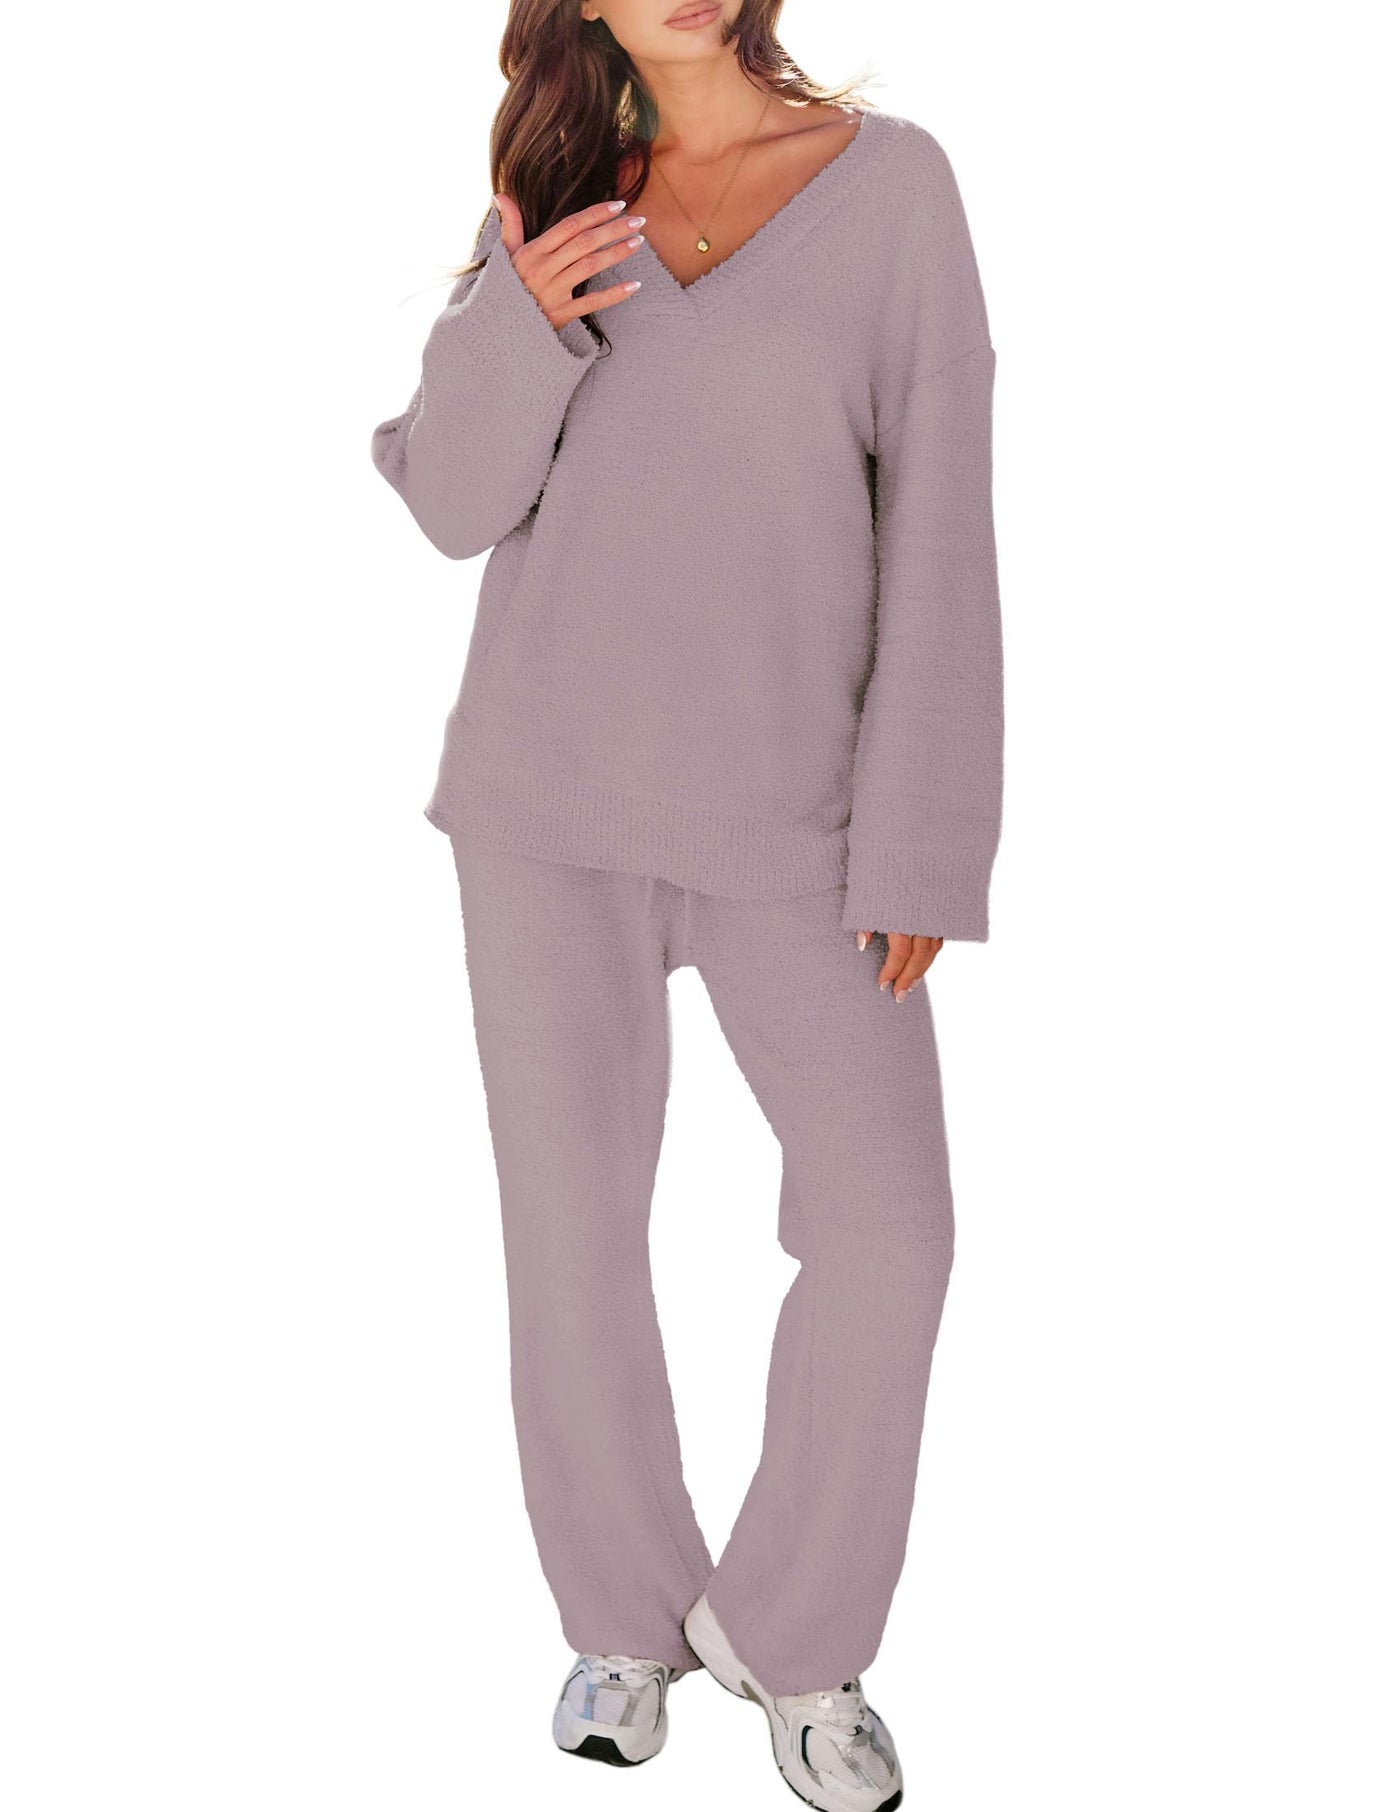 Ailoqing Fuzzy Fleece Pajama Sets for Women Soft Plush Pullover Pants Set 2  Piece Sleepwear Loungewear(Camel-S) at  Women's Clothing store